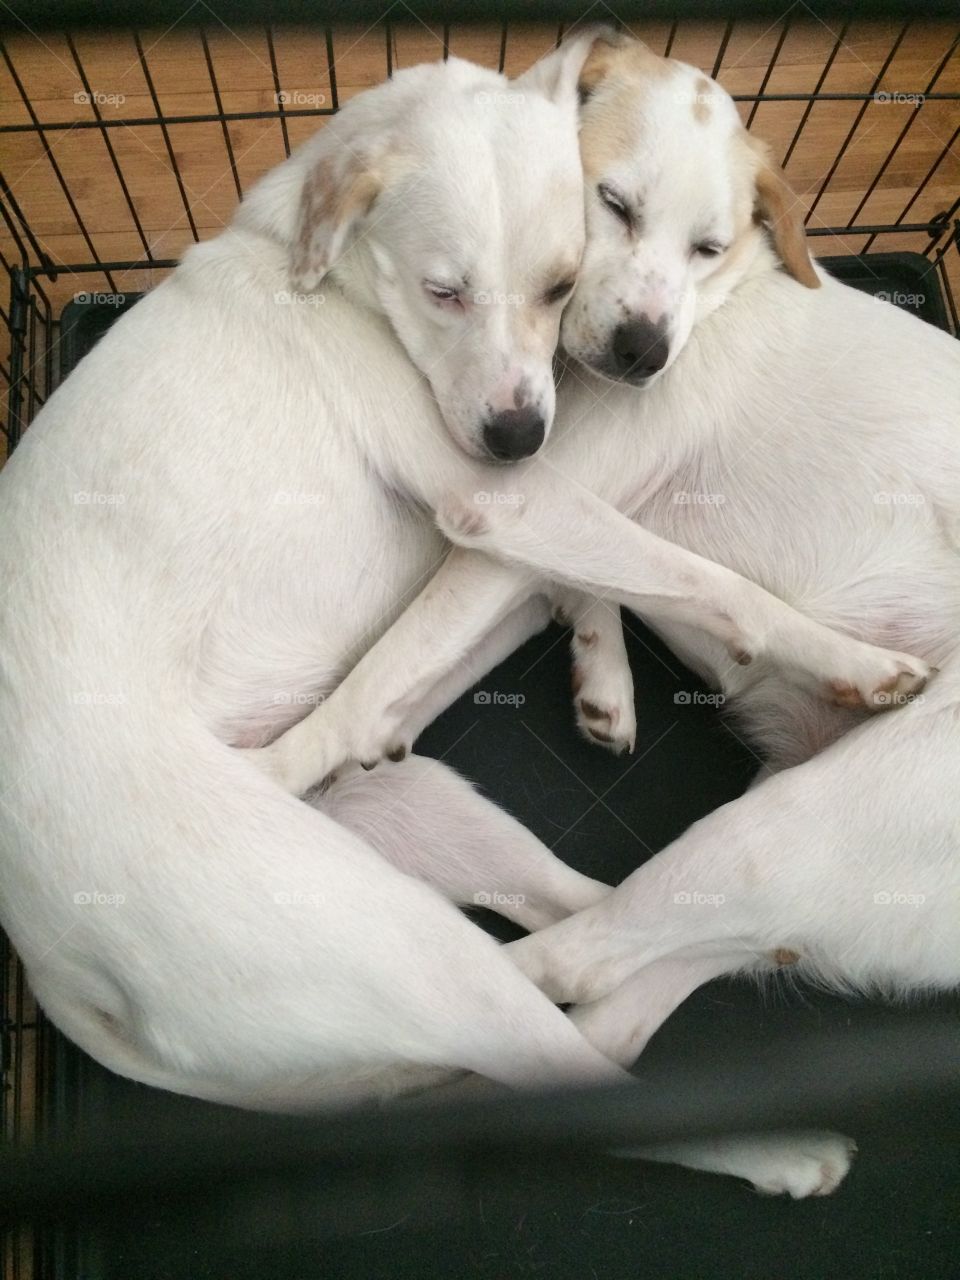 Sister dogs embrace while napping